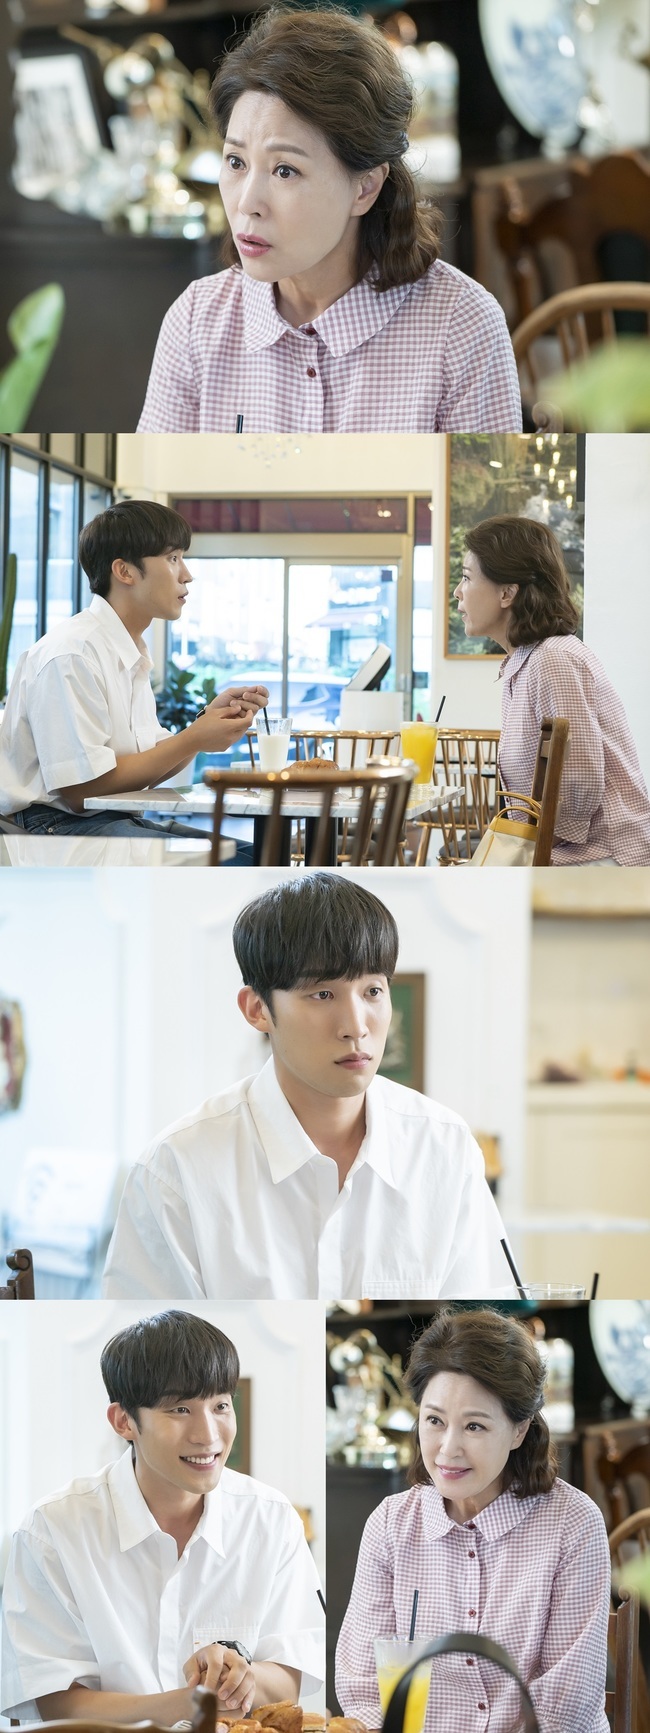 The meeting between Cha Hwa-Yeon and Lee Sang Yi was captured.On KBS 2TV weekend drama Ive Goed Once (playplayplay by Yang Hee-seung, An-Am/Director Lee Jae-sang), which will be broadcast on September 5, the meeting between Cha Hwa-Yeon and Lee Sang Yi will be drawn.In the last broadcast, Yun Jae-Suk (Lee Sang Yi), who struggles to get his marriage accepted by Songgas family, was portrayed.Not only did she present a bouquet of flowers to Cha Hwa-Yeon, but she also helped her work at Songanes family event.Since then, Song Da-hee (Lee Cho-hee) and Yun Jae-Suk have been accepted by both parents and made viewers feel uncomfortable.Among them, the meeting between Jang Ok-bun (Cha Hwa-Yeon) and Yun Jae-Suk is caught and attracts attention.In the meantime, Jang Ok-bun has expressed his intention to oppose the marriage of his youngest daughter Song Dae-hee and Yun Jae-Suk, so he is wondering why the two met.Especially, when you make a surprised expression at the words of Yun Jae-Suk, the moment of Jang Ok-min, who looks laughing at his appearance, stimulates interest in what words have come between them.On this day, Yun Jae-Suk will show off his cuteness as well as his uniqueness. On the 5th, he will show his relaxedness by showing off his uniqueness.emigration site